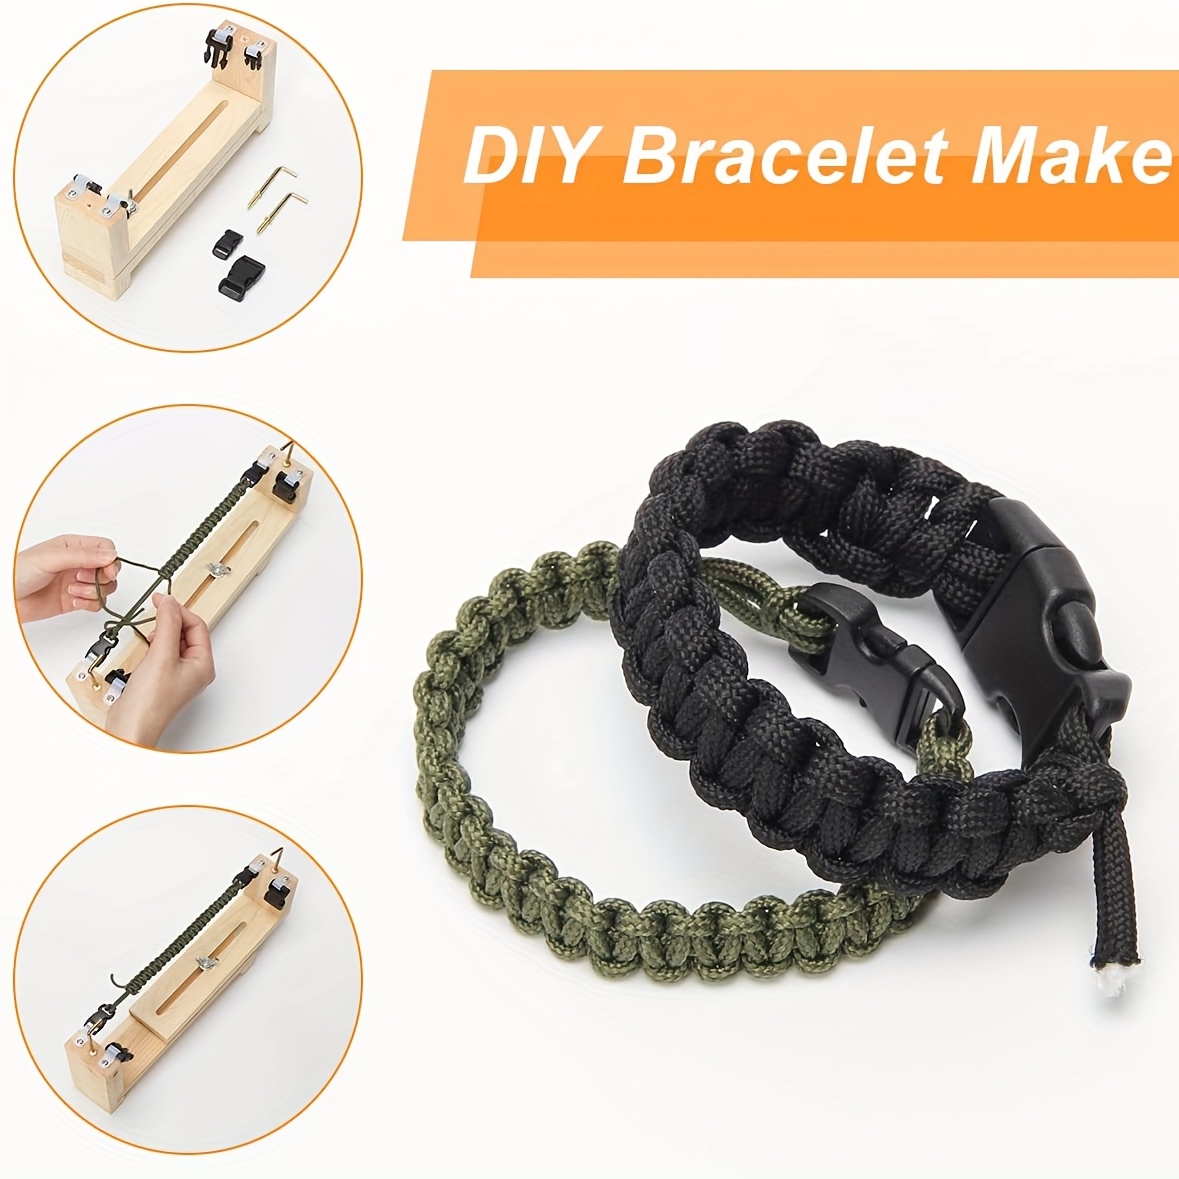 Make Unique Paracord Bracelets With This Adjustable Diy Tool Kit